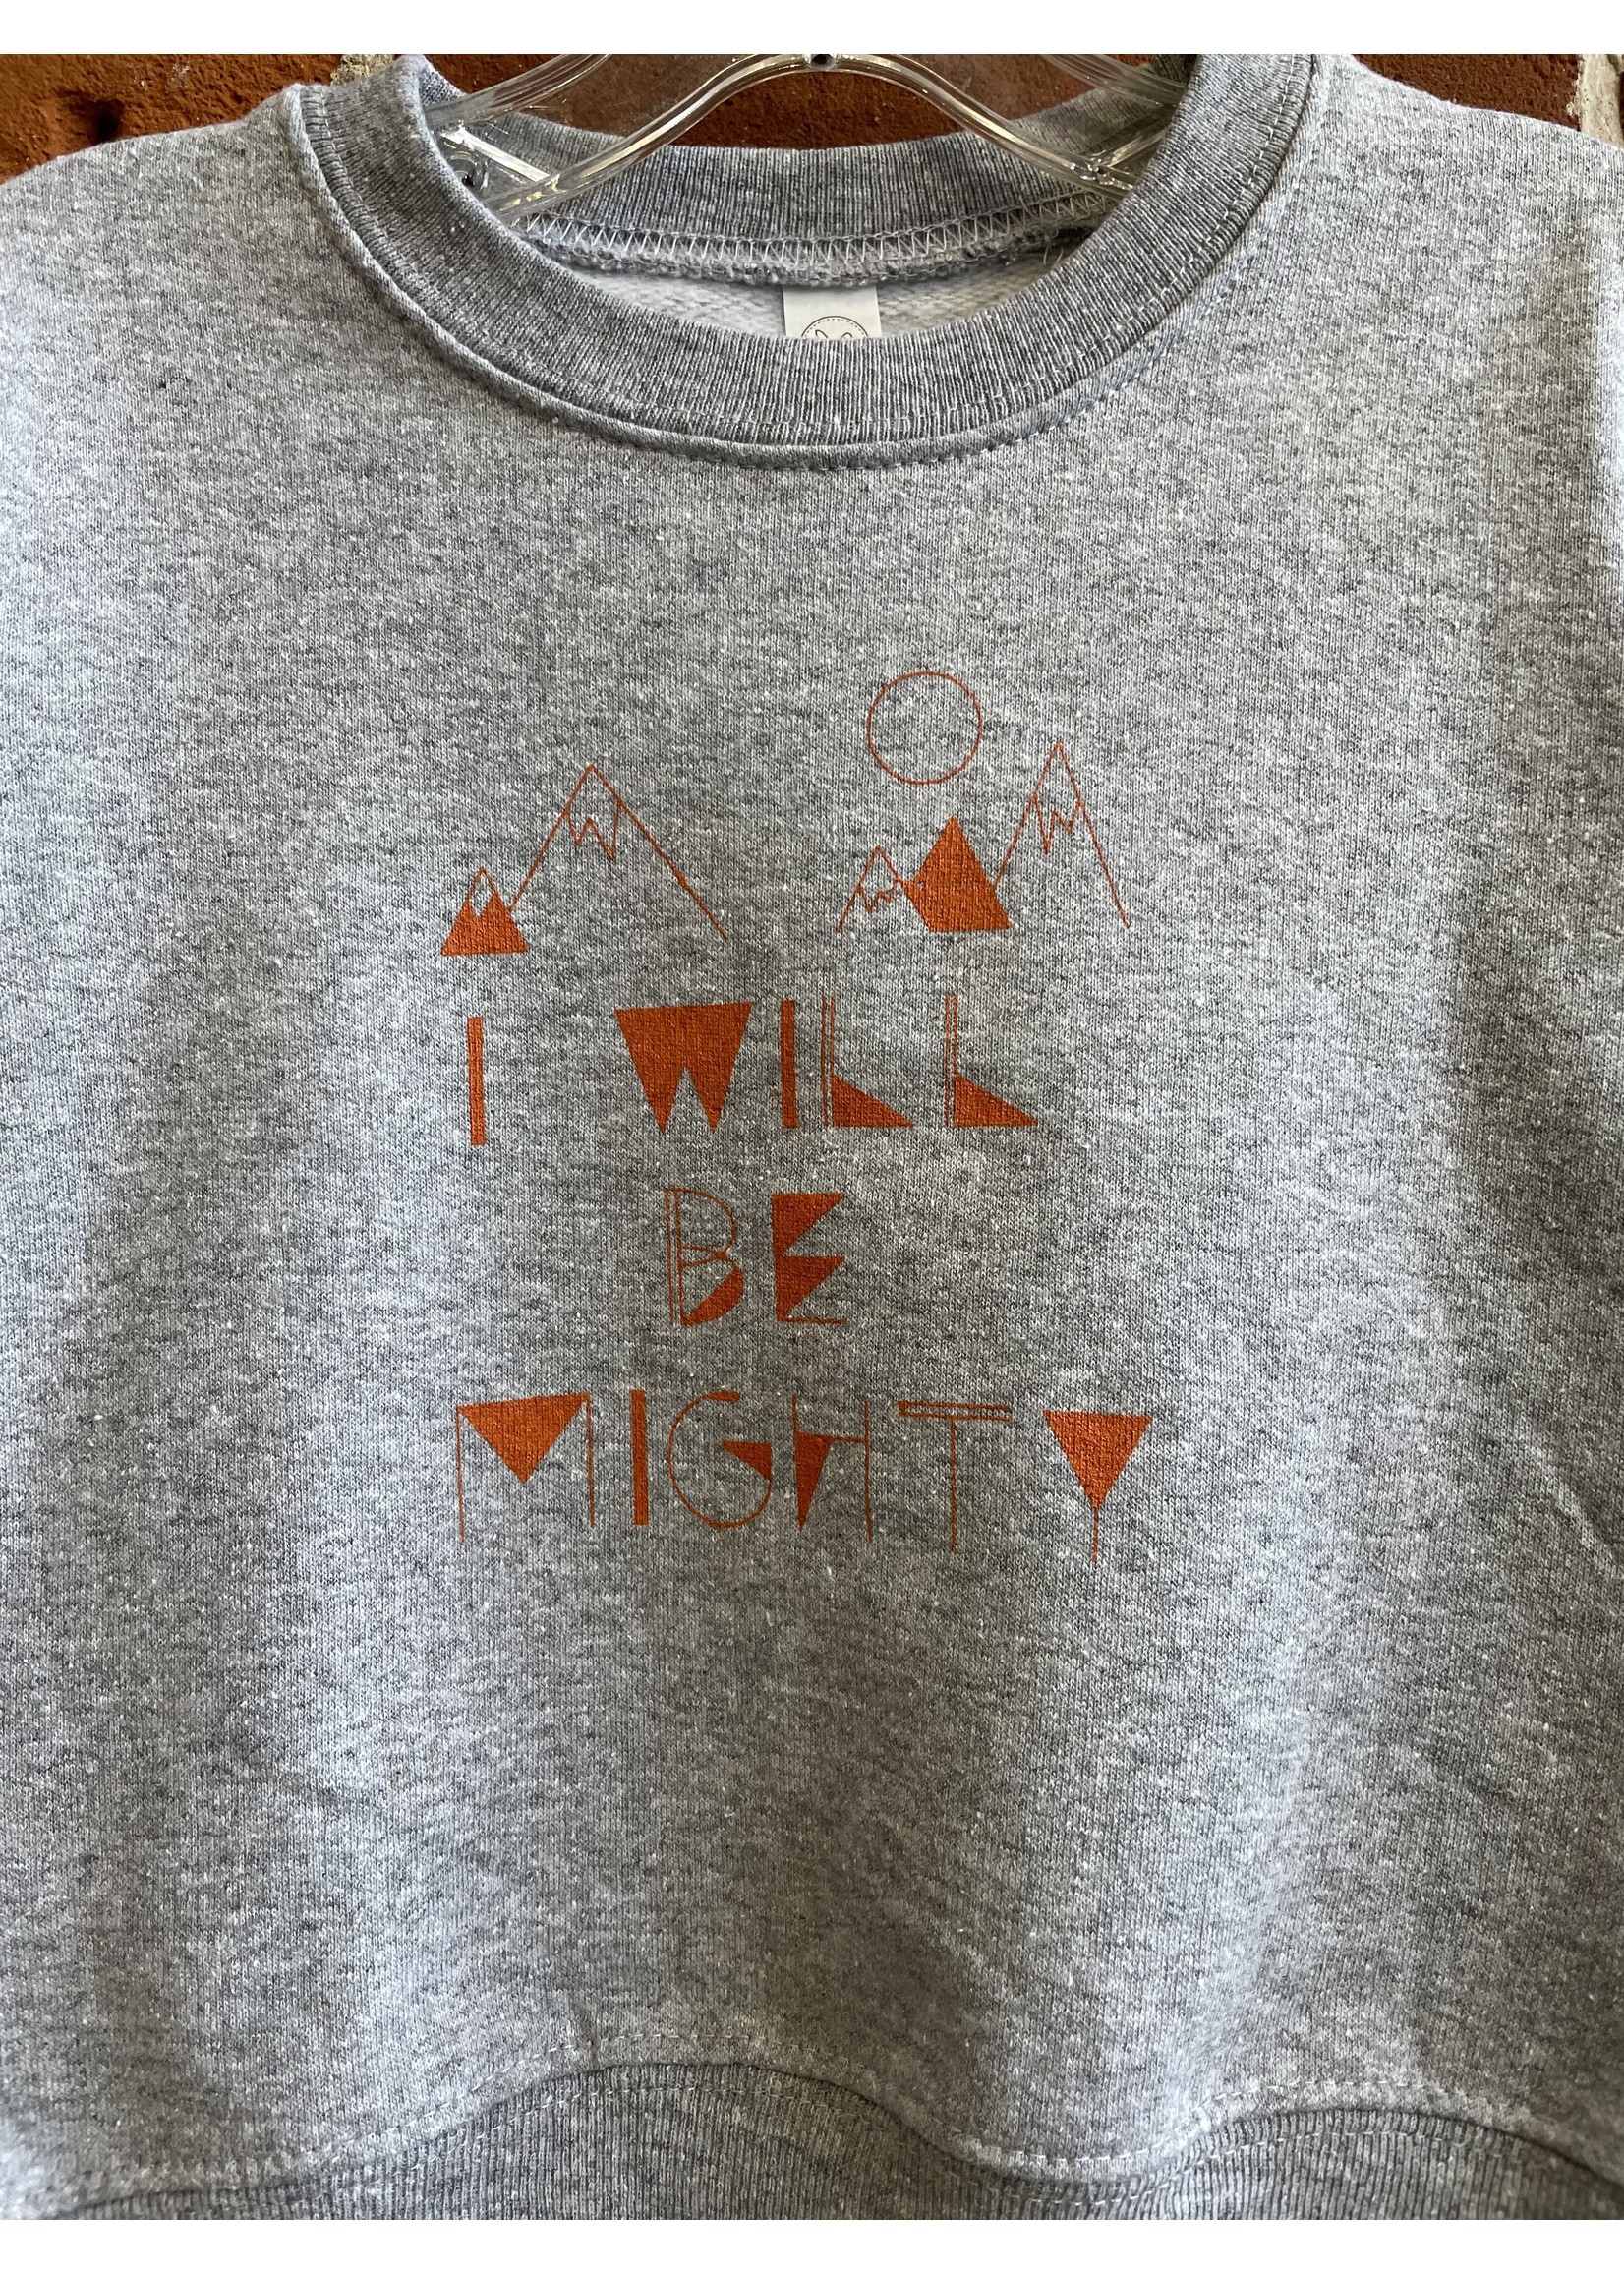 Tangled Up In Hue SALE: Gray I Will Be Mighty Youth Crew Neck Sweatshirt